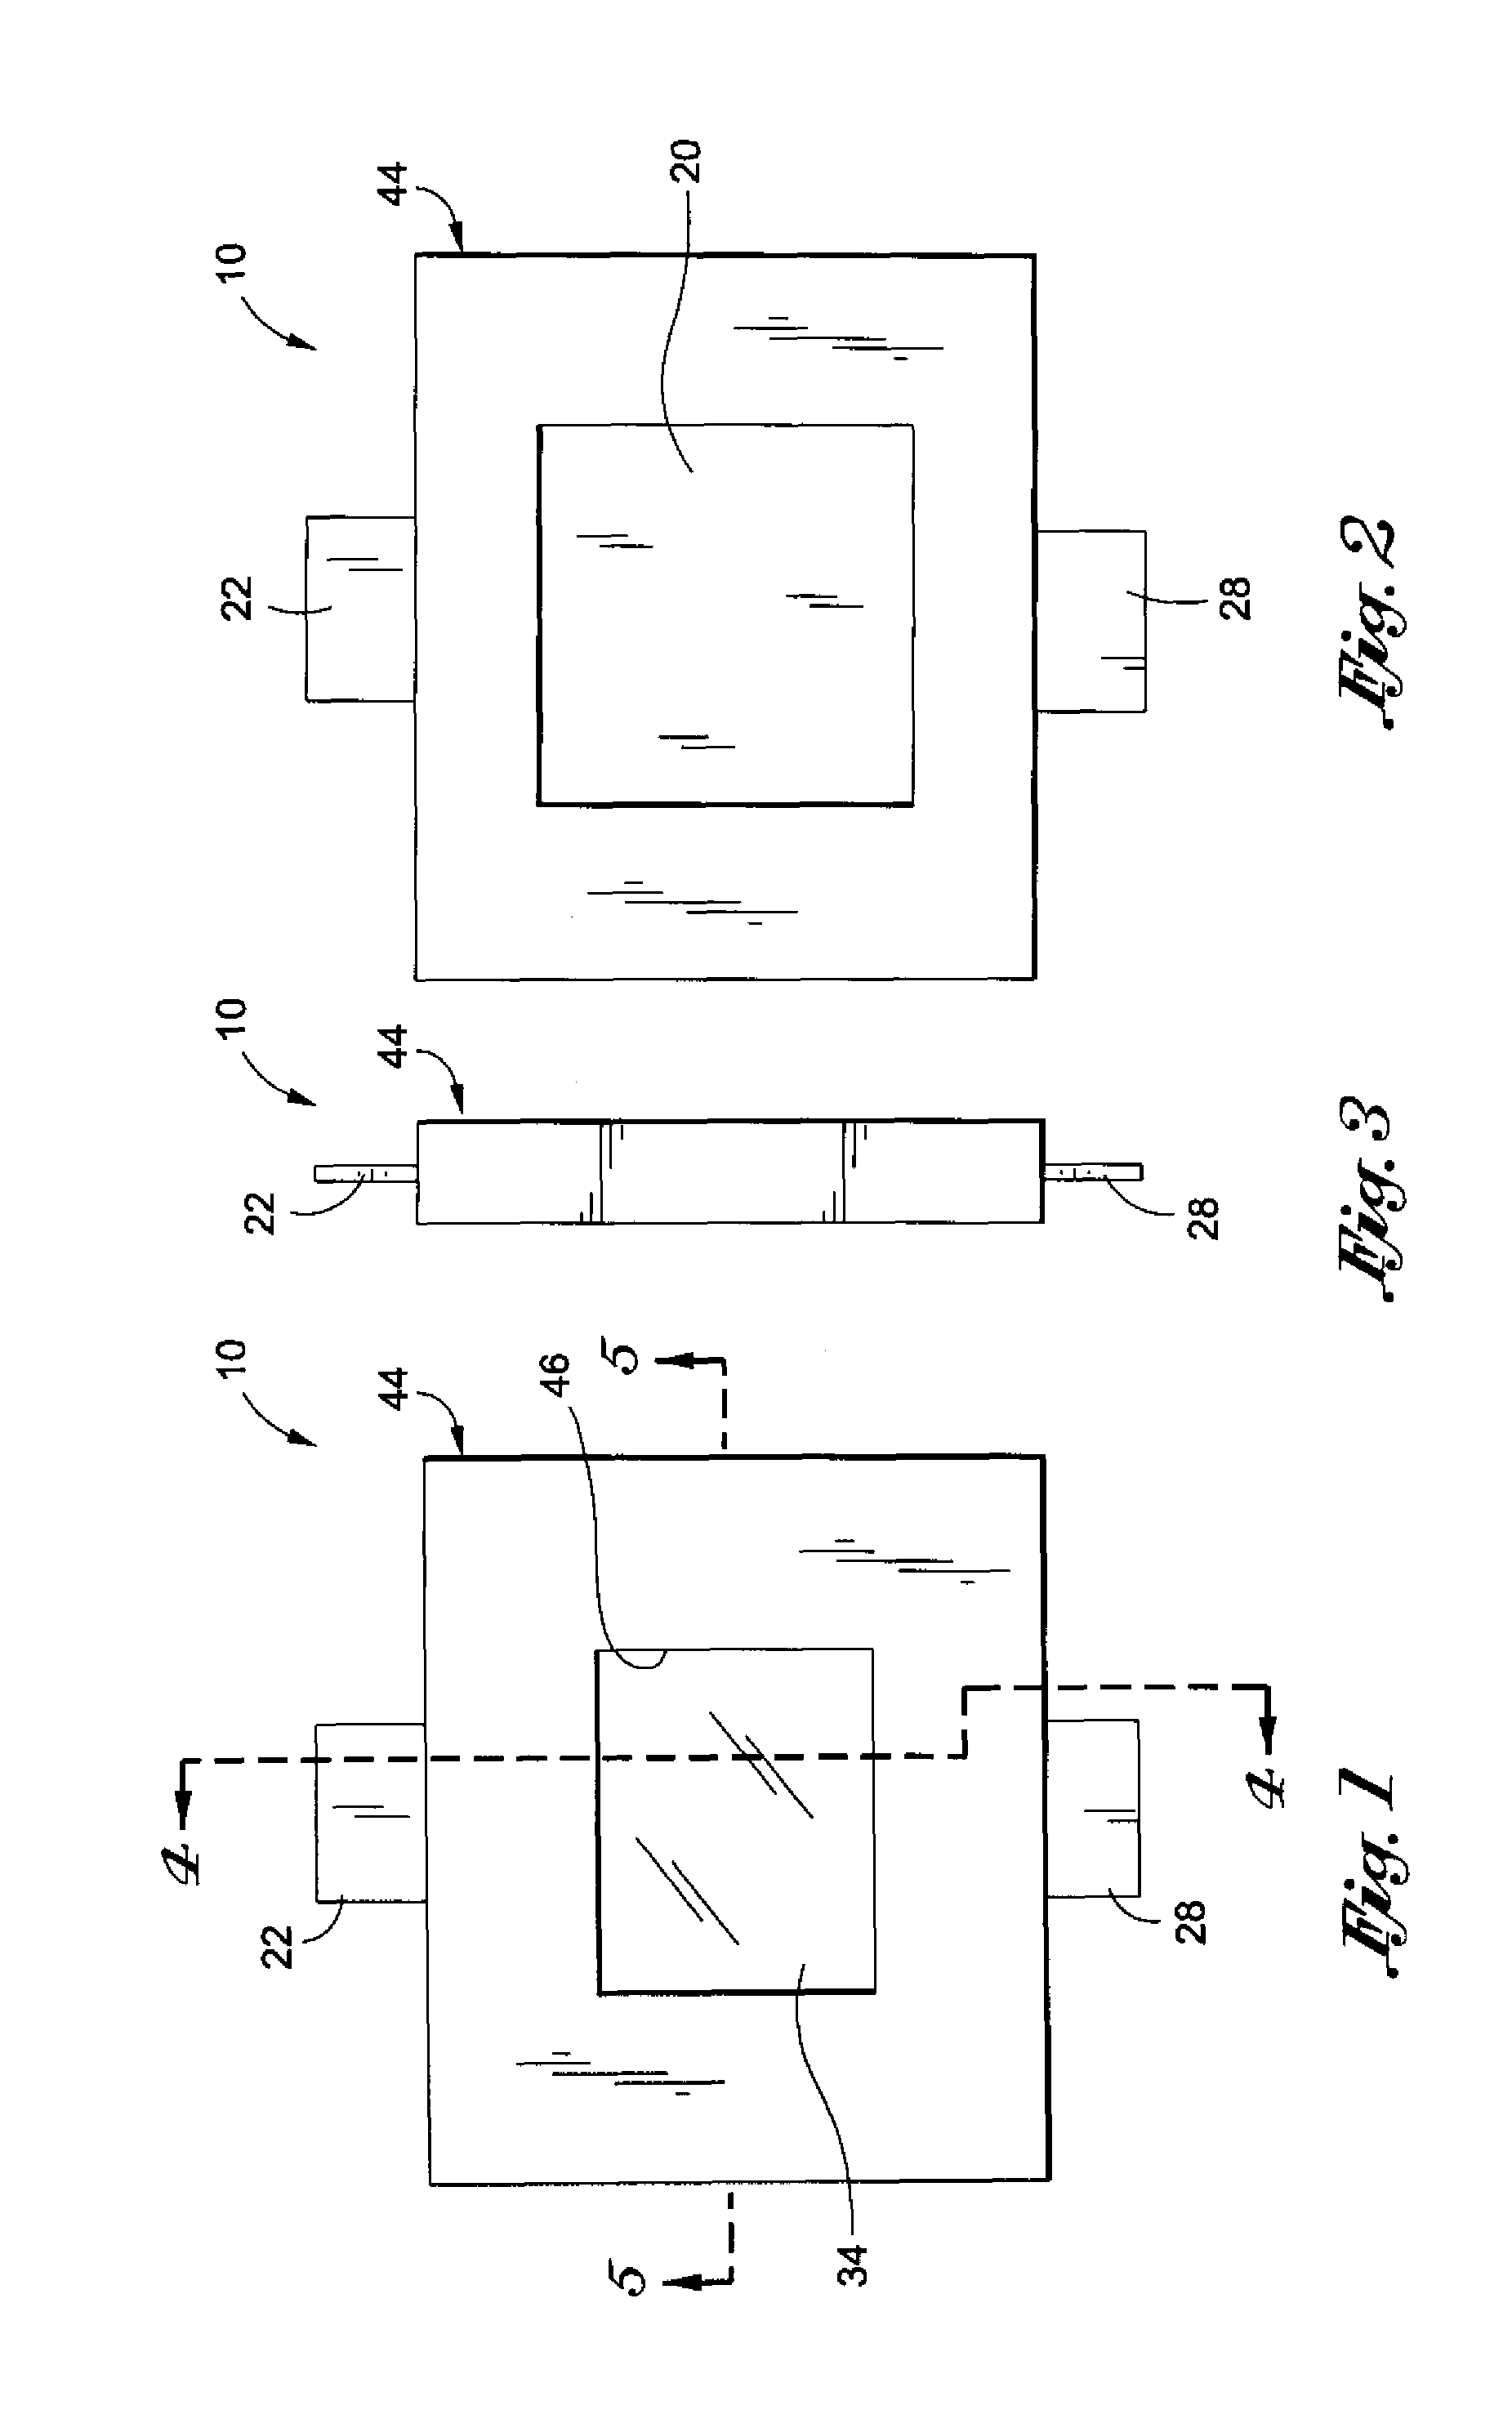 Leadframe structure for concentrated photovoltaic receiver package